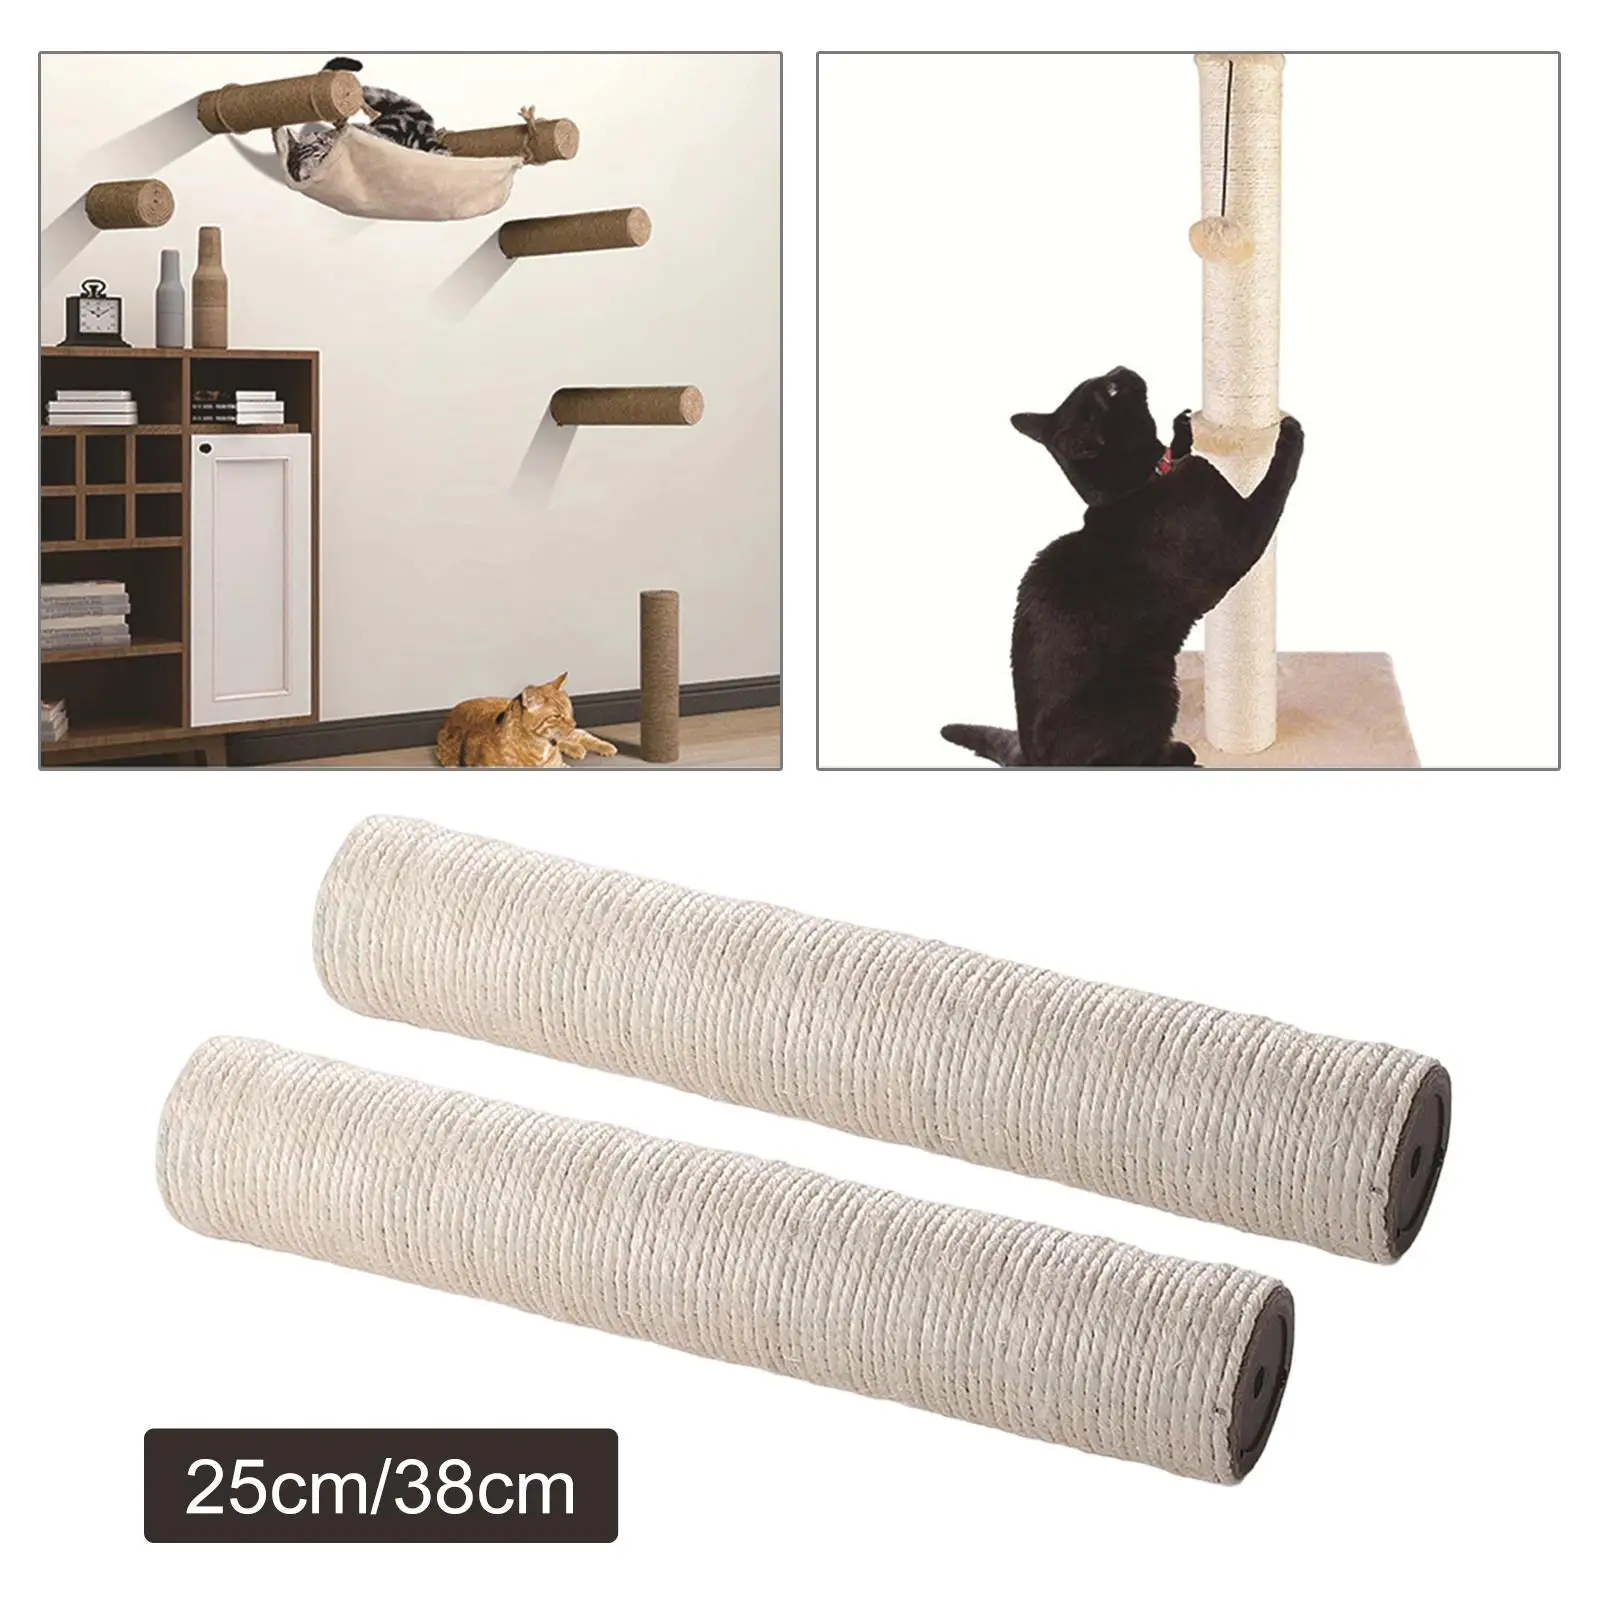  Rope Scratching Post Replacement, Cats Climbing Post Scratch Posts Refills Interactive Toy Dia 7cm for Cats Kitten Pet